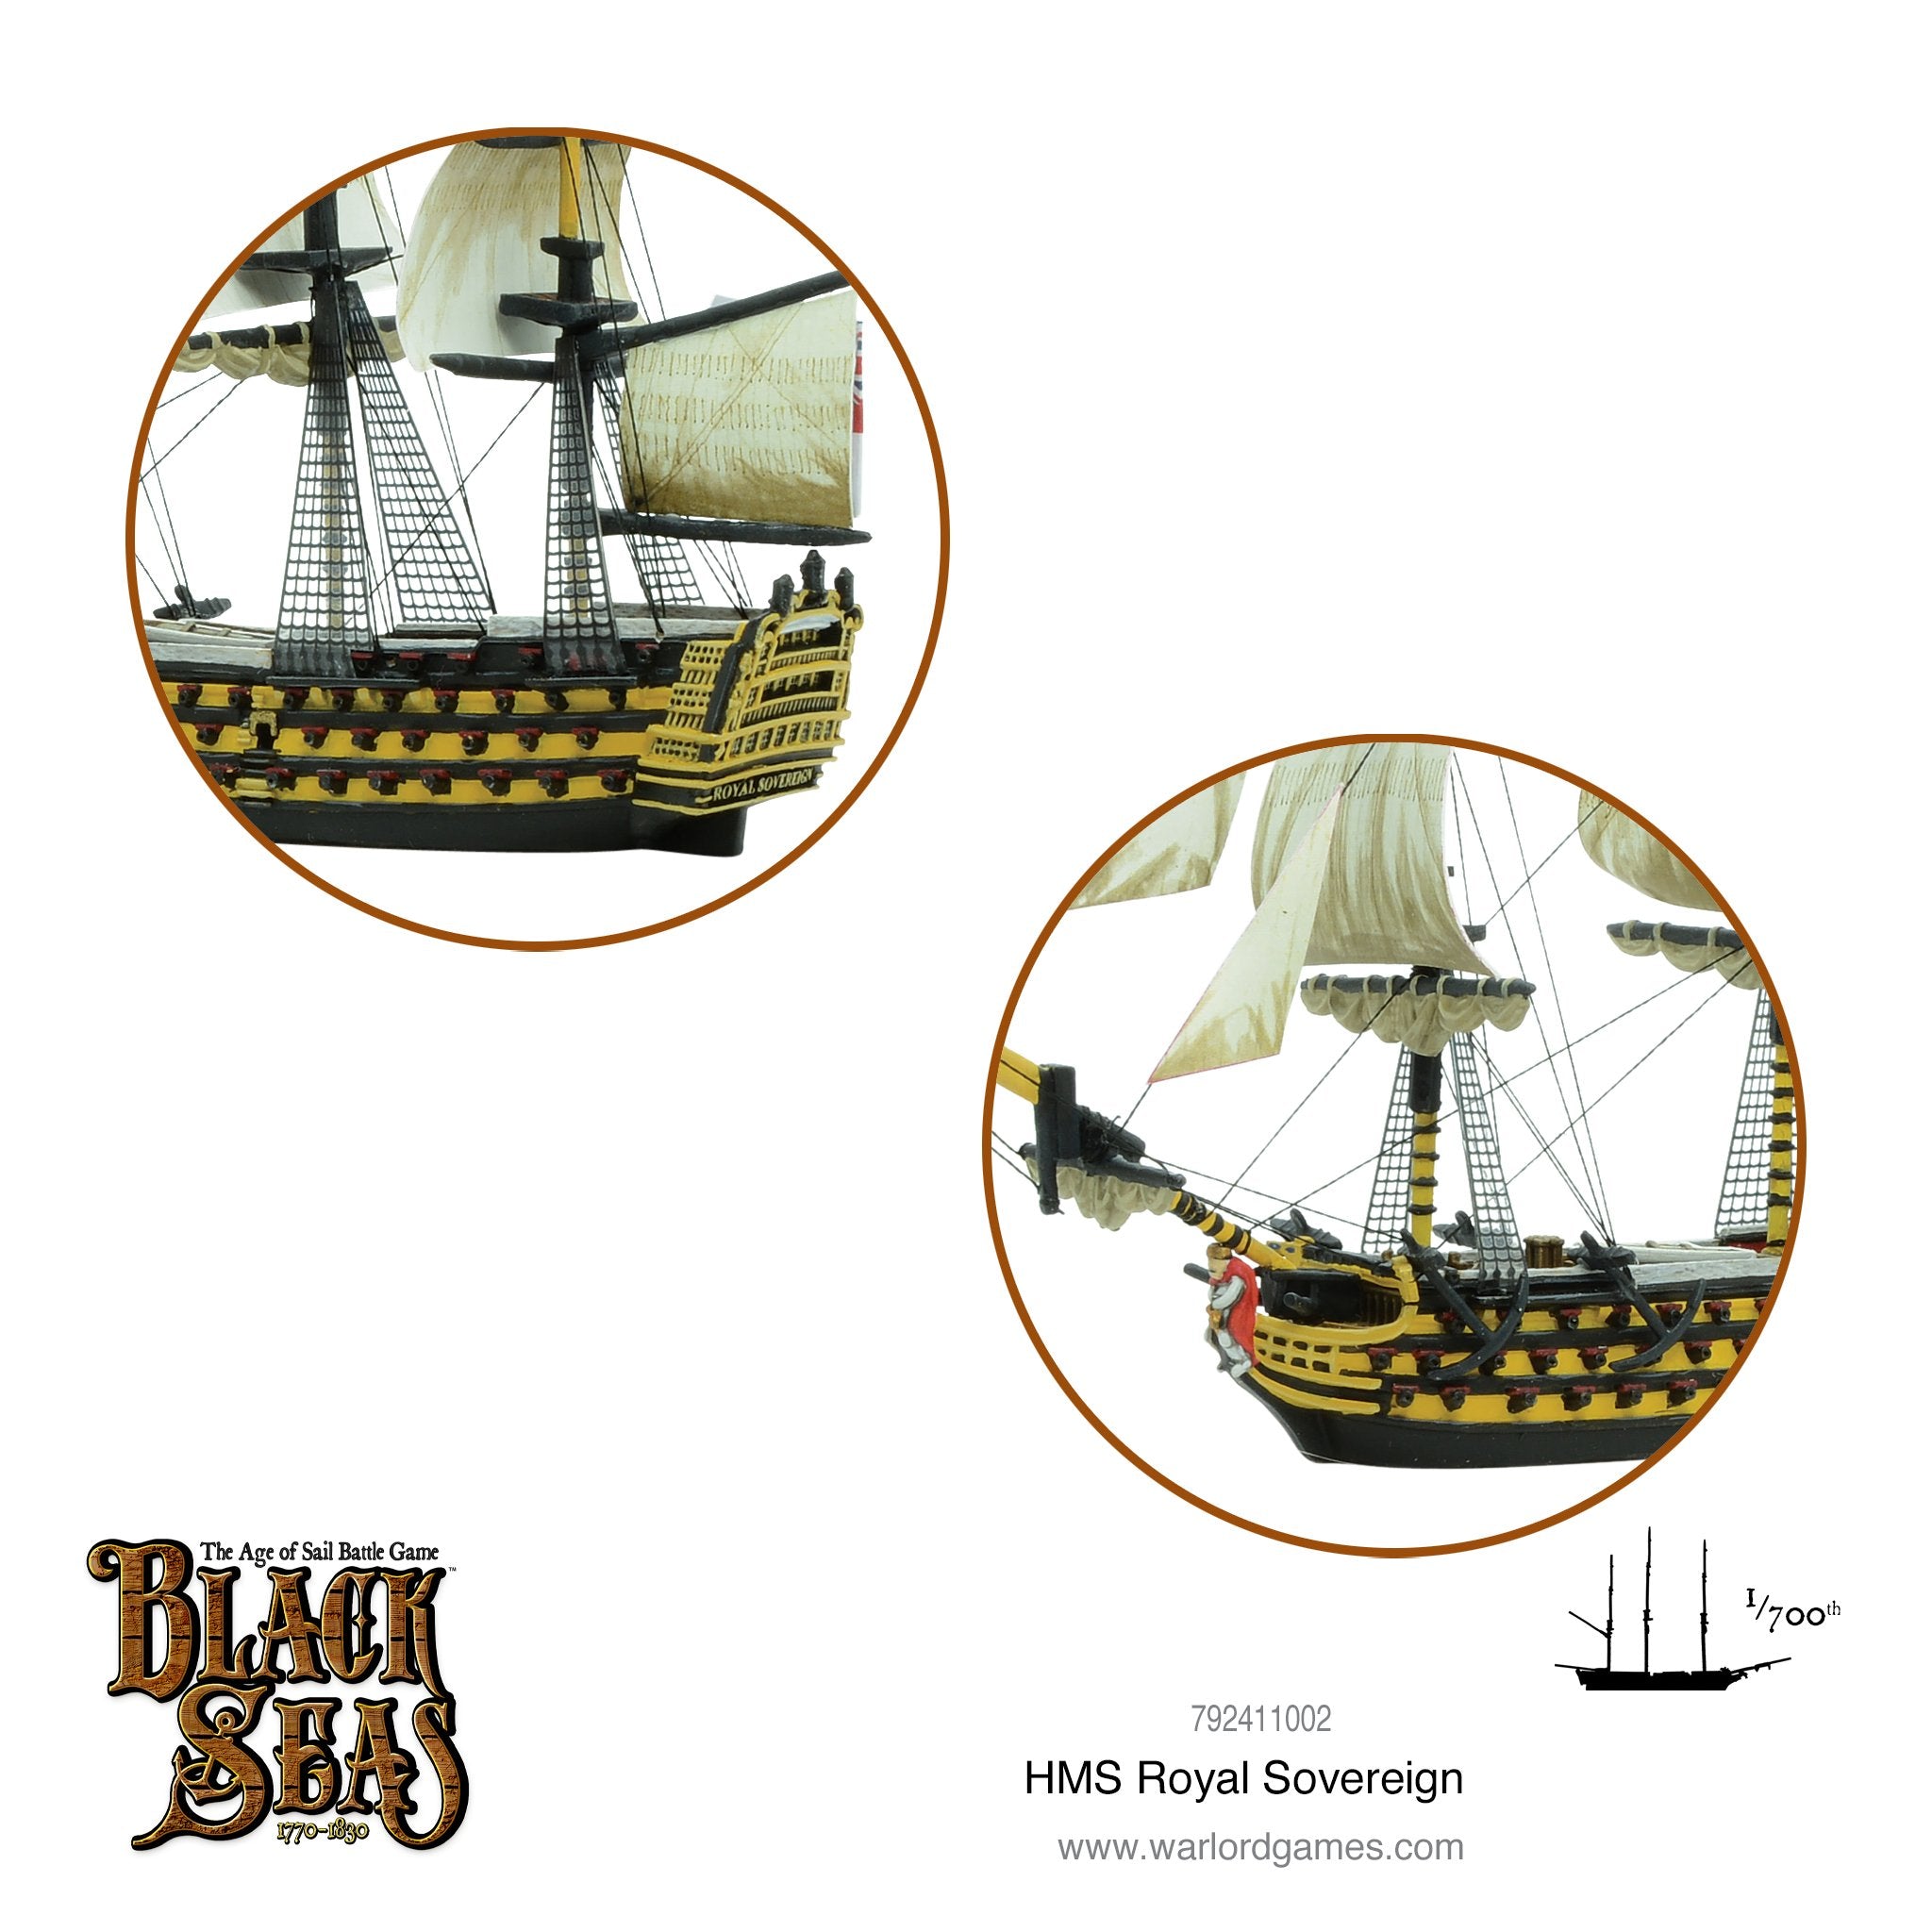 Hms Royal Sovereign Warlord Games Ltd - british armed forces roblox britishsovereign